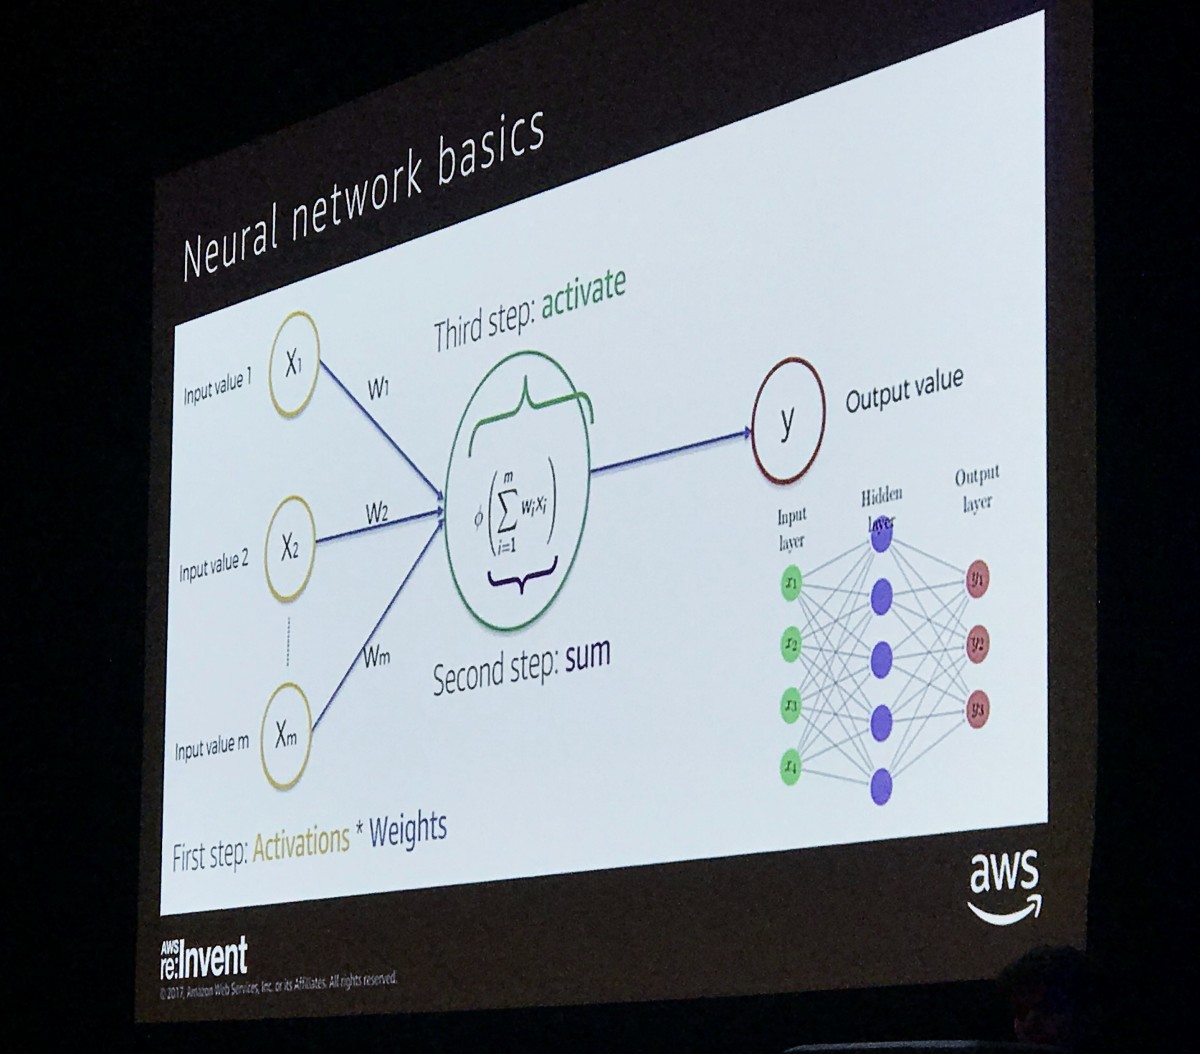 AWS Neural networking